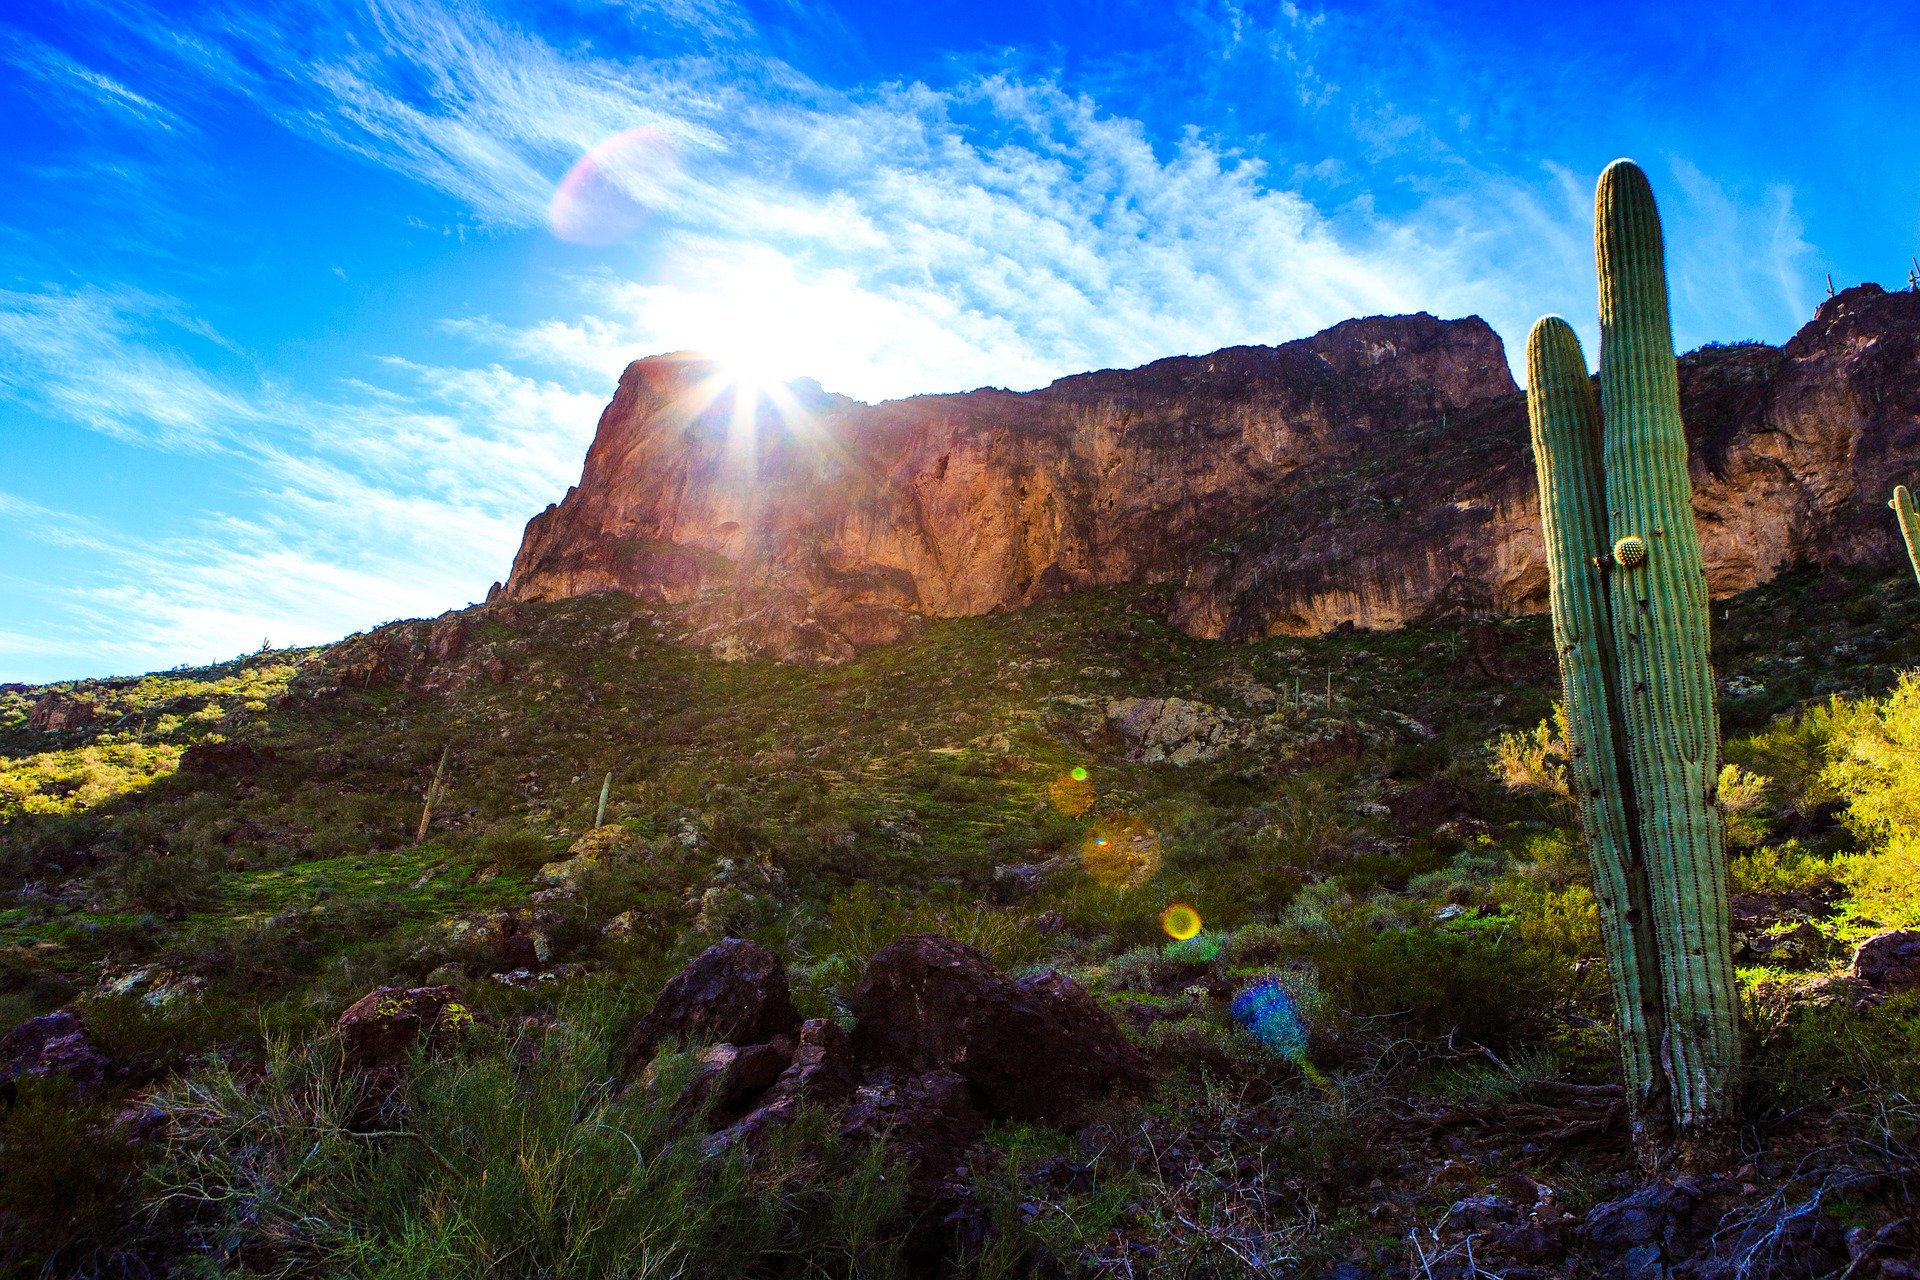 Enjoy hiking and more on your list of attractions in Scottsdale